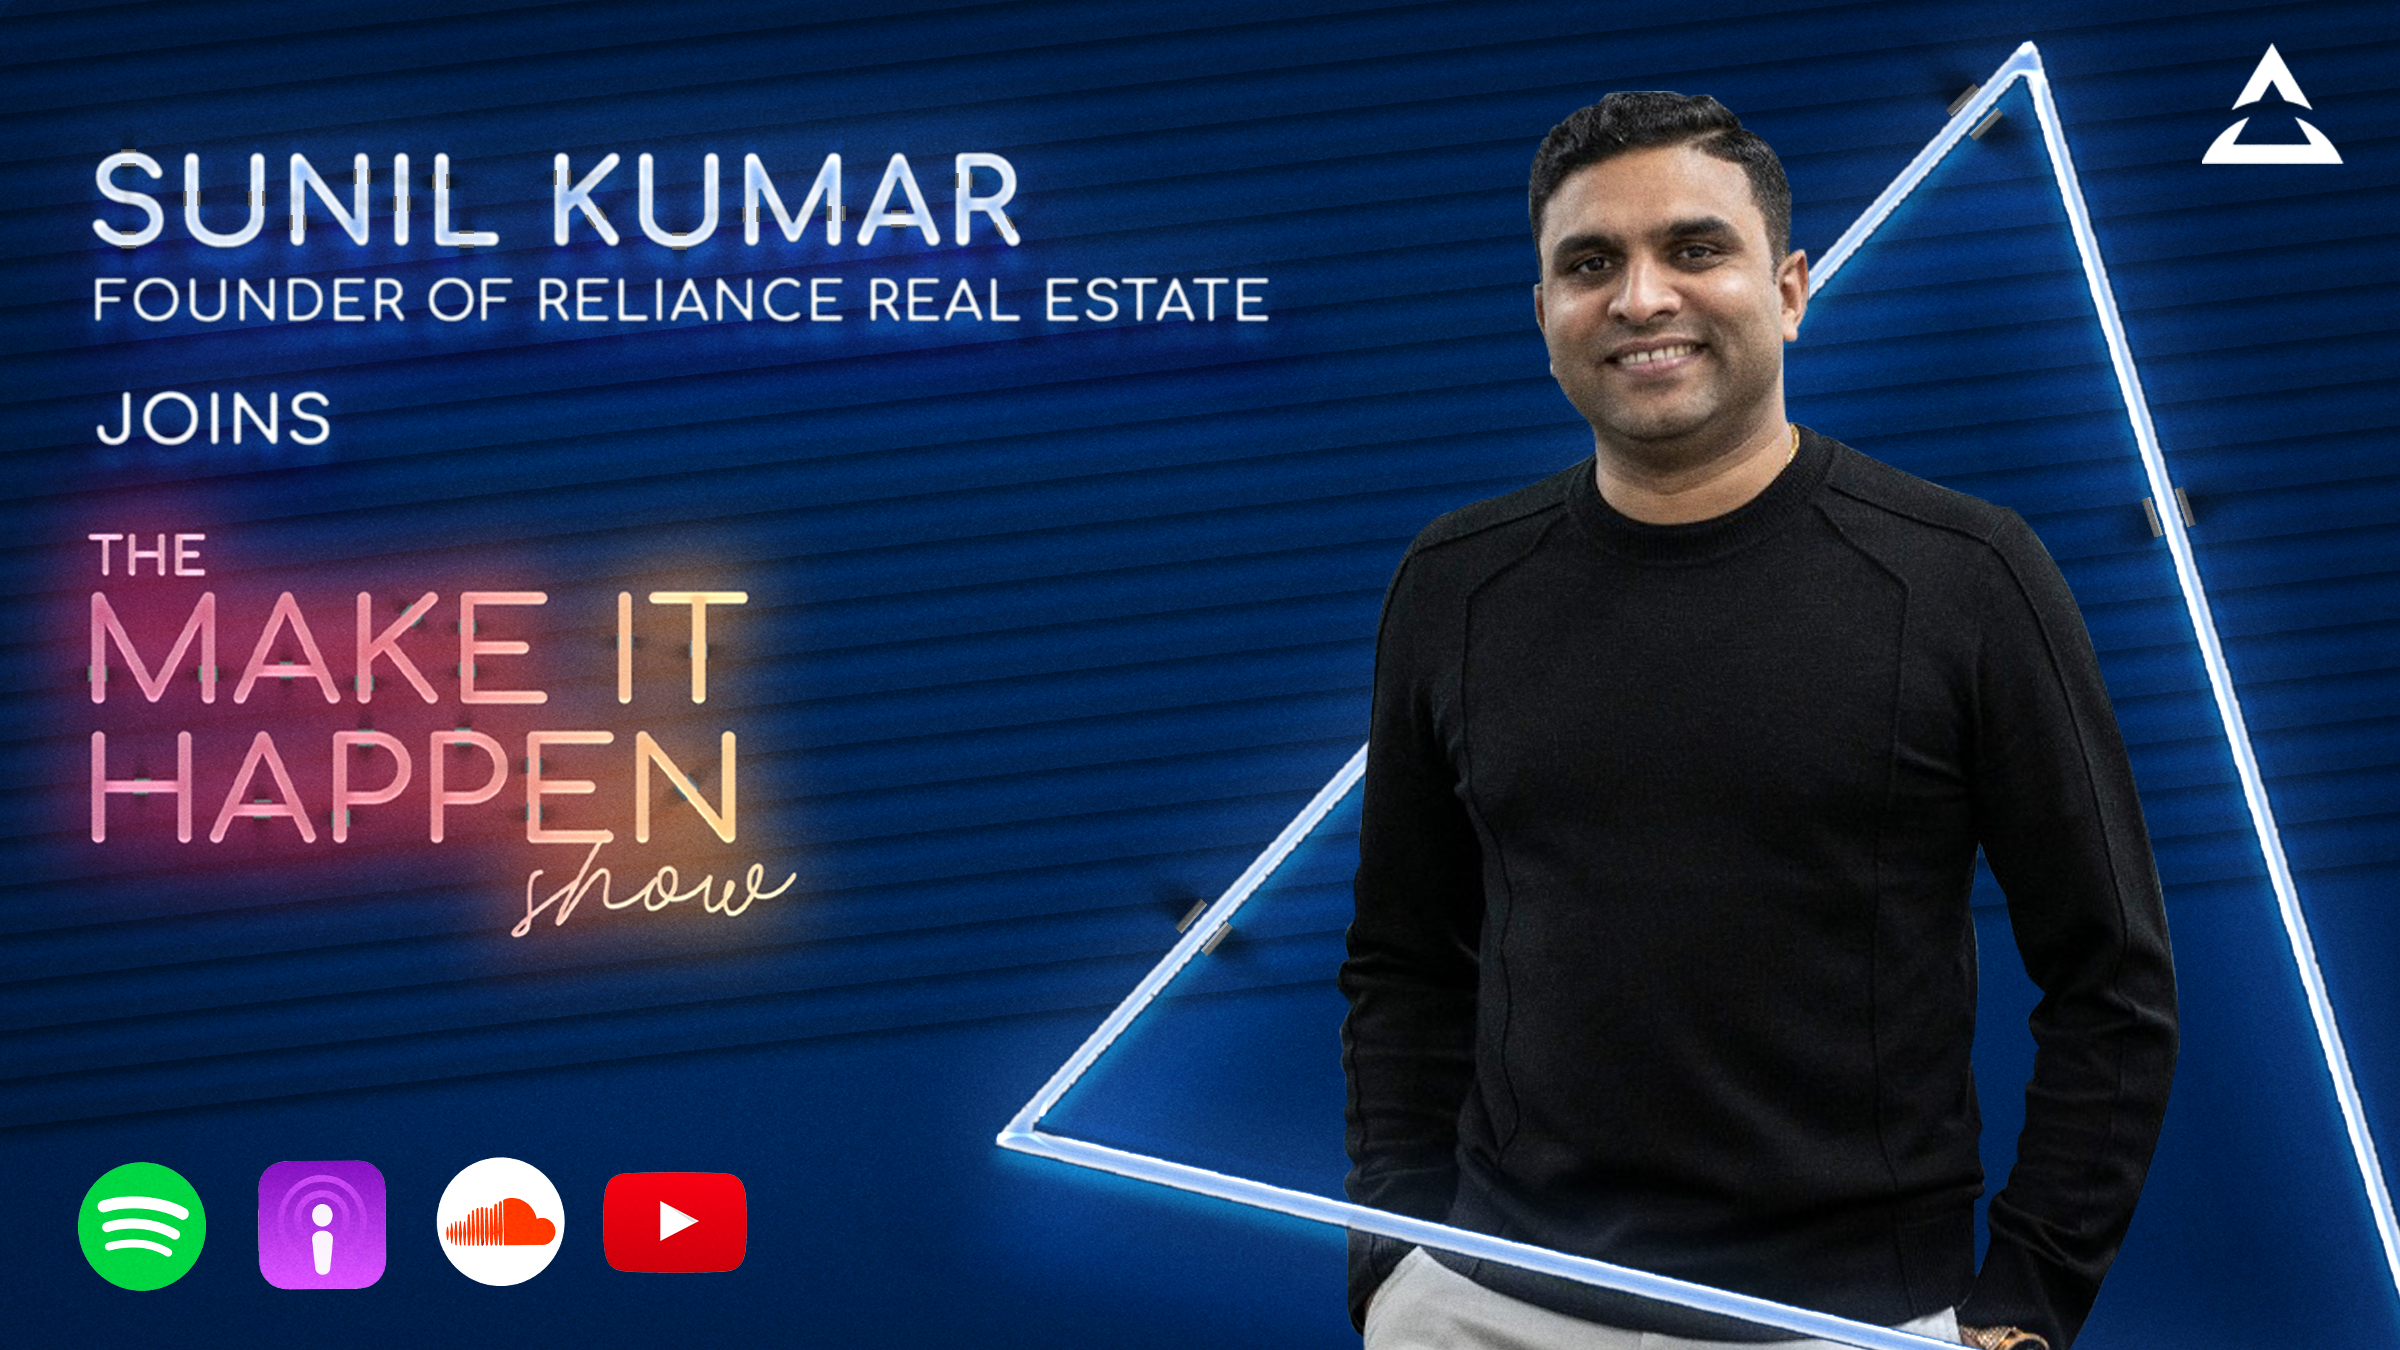 Sunil Kumar, Founder of Reliance Real Estate joins The Make It Happen Show